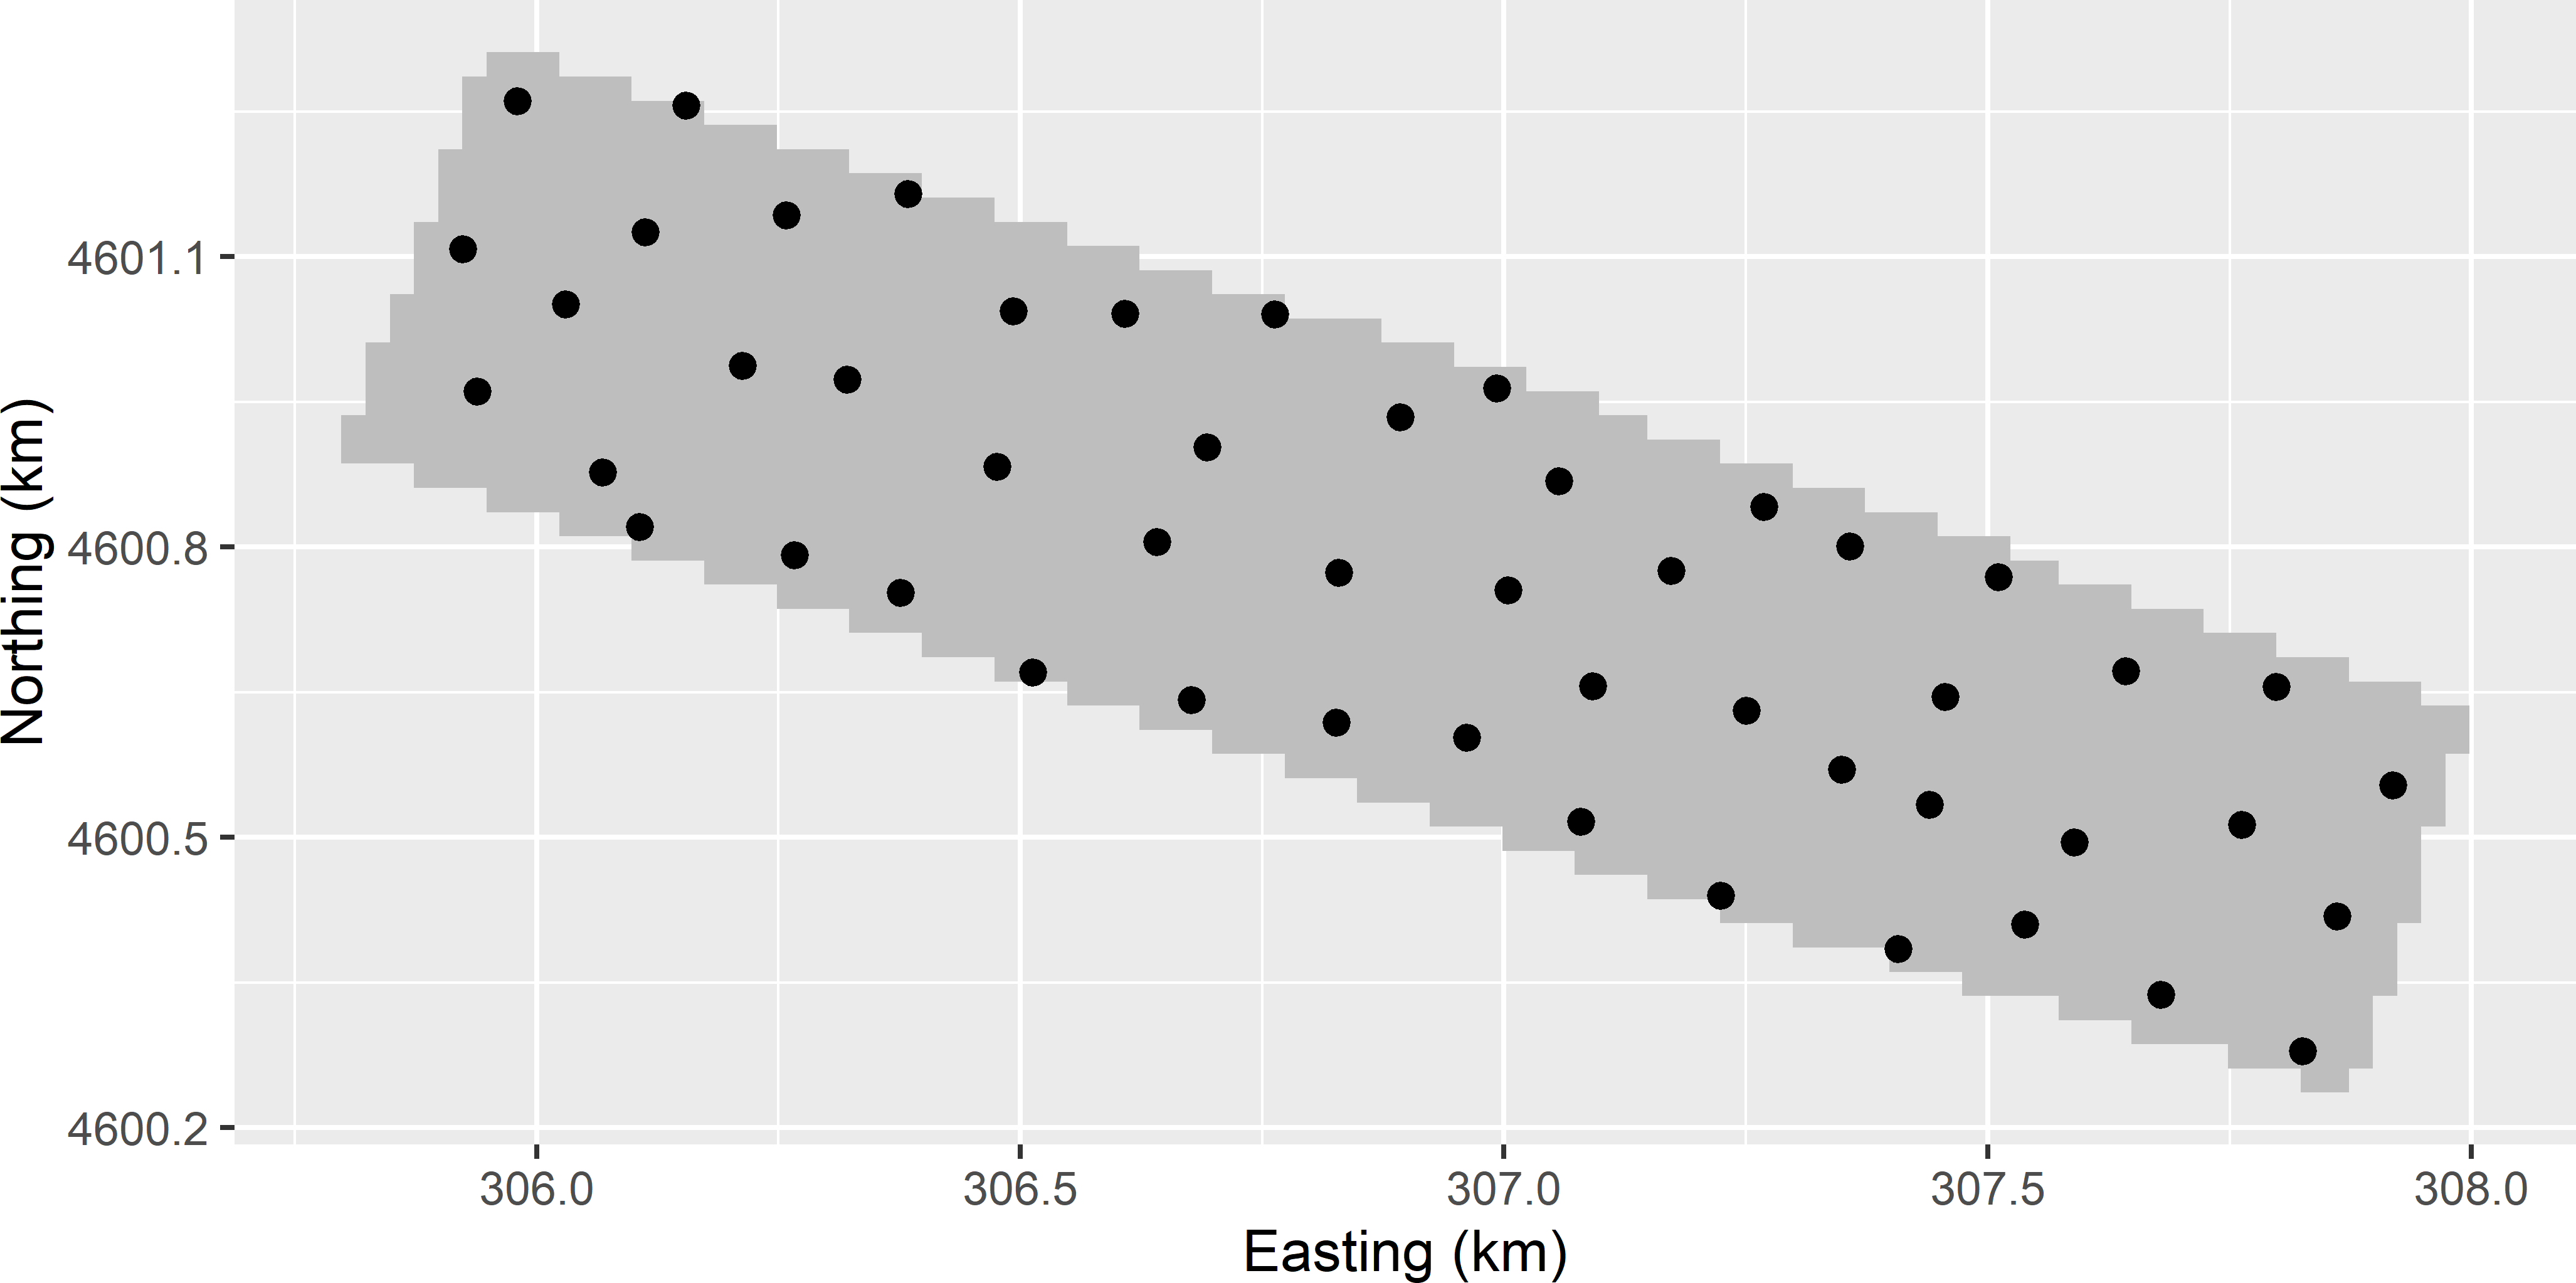 Optimised sampling pattern of 50 points on the Cotton Research Farm, using the P90 of ordinary kriging predictions of lnECe as a minimisation criterion.